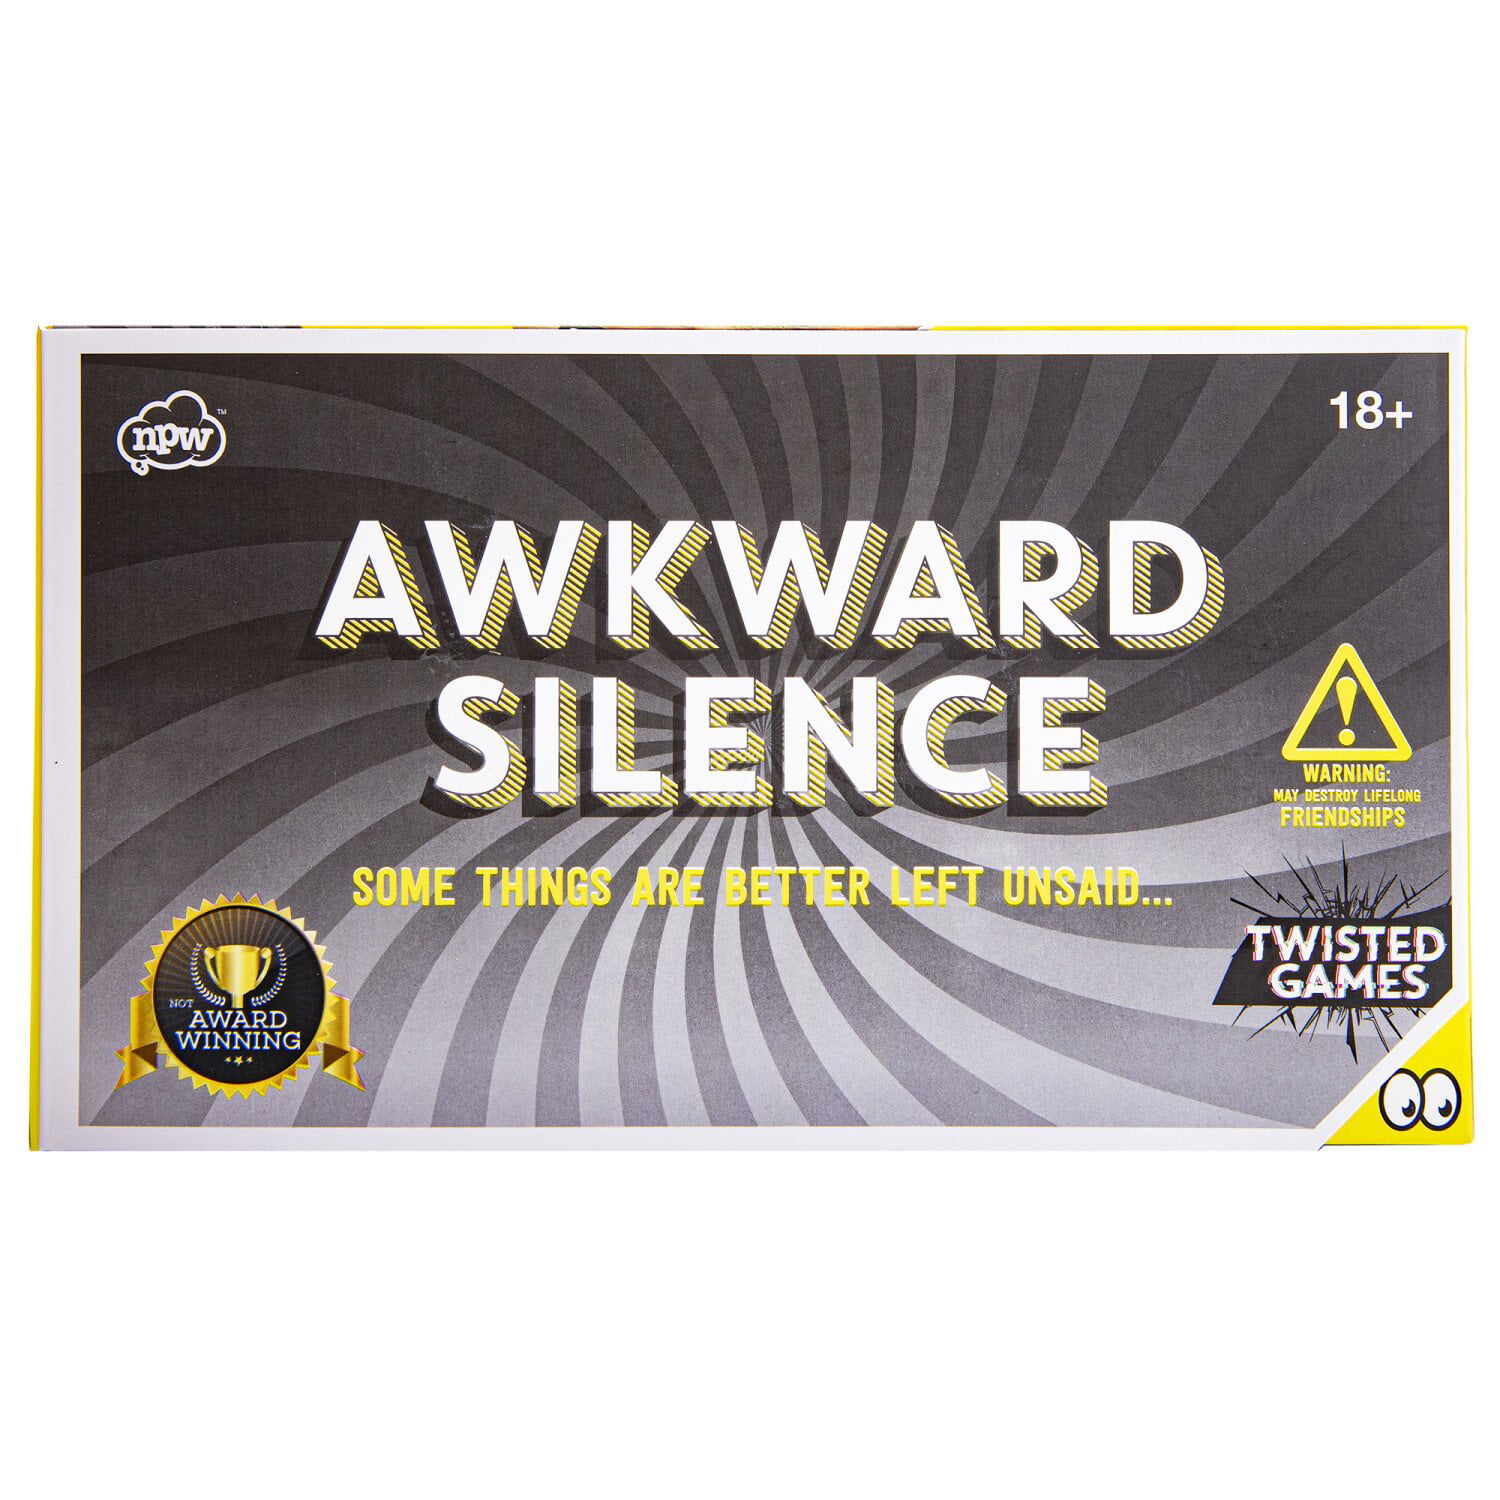 Details about   Twisted Games AWKWARD SILENCE Game New Factory Sealed 